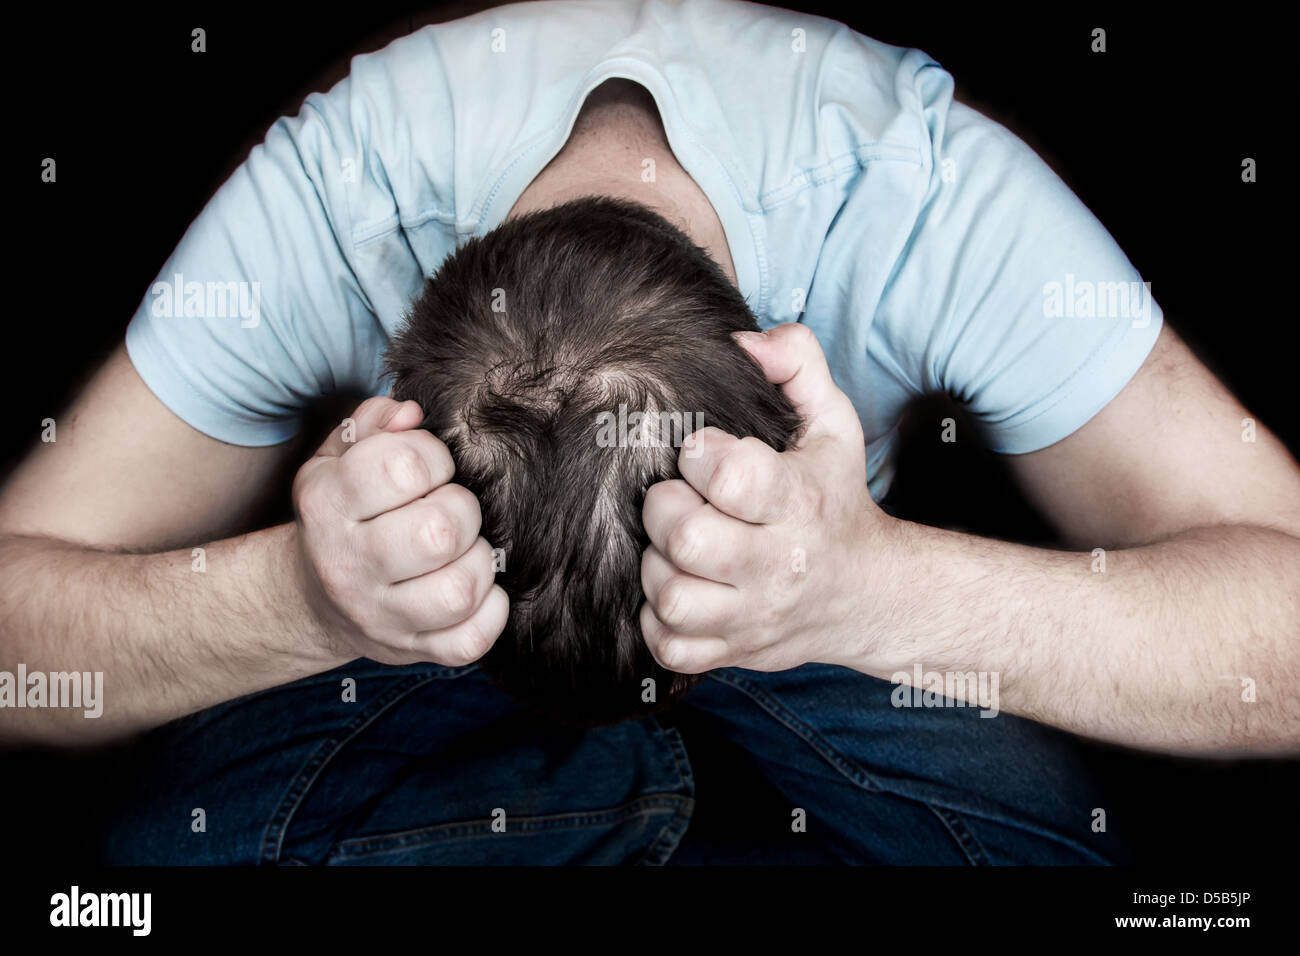 Man holding his head in his hands sitting on floor over black background. Despair, depression, hopelessness concept. Stock Photo